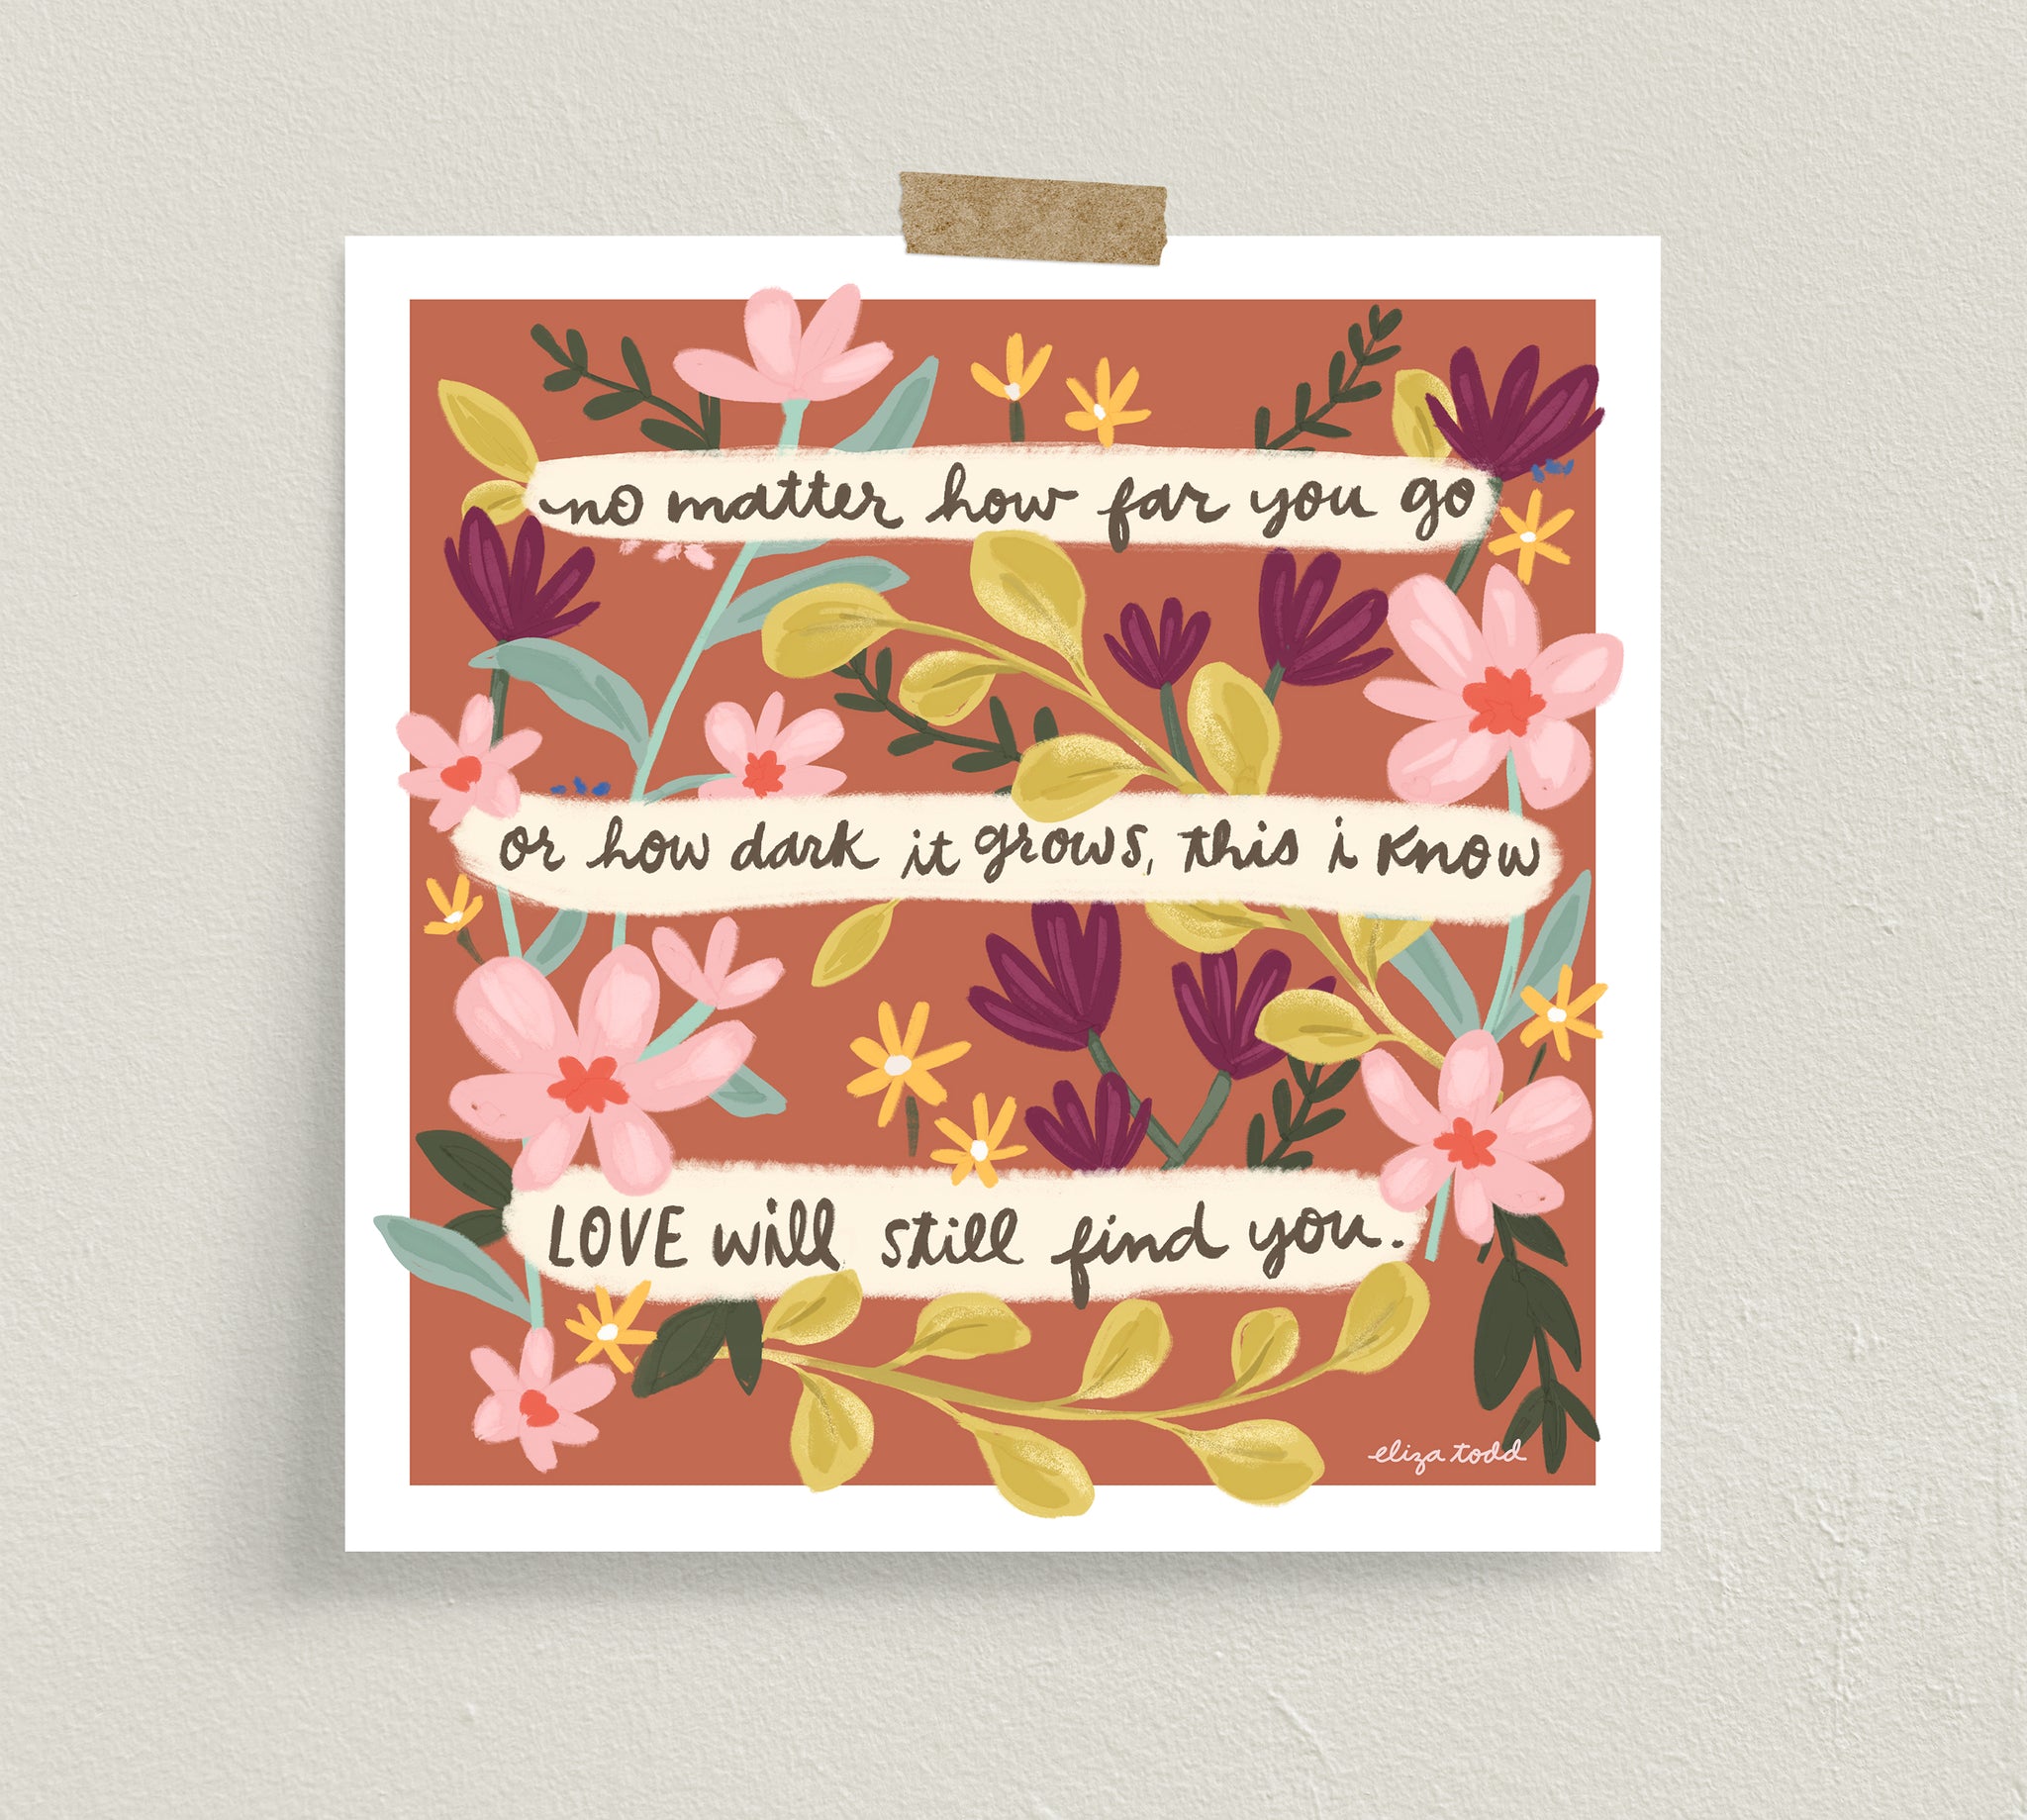 Fine art prints by Eliza Todd featuring flowers and saying "No matter how far you go or how dark it grows, this I know, Love will still find you." - APeaceofWerk.com